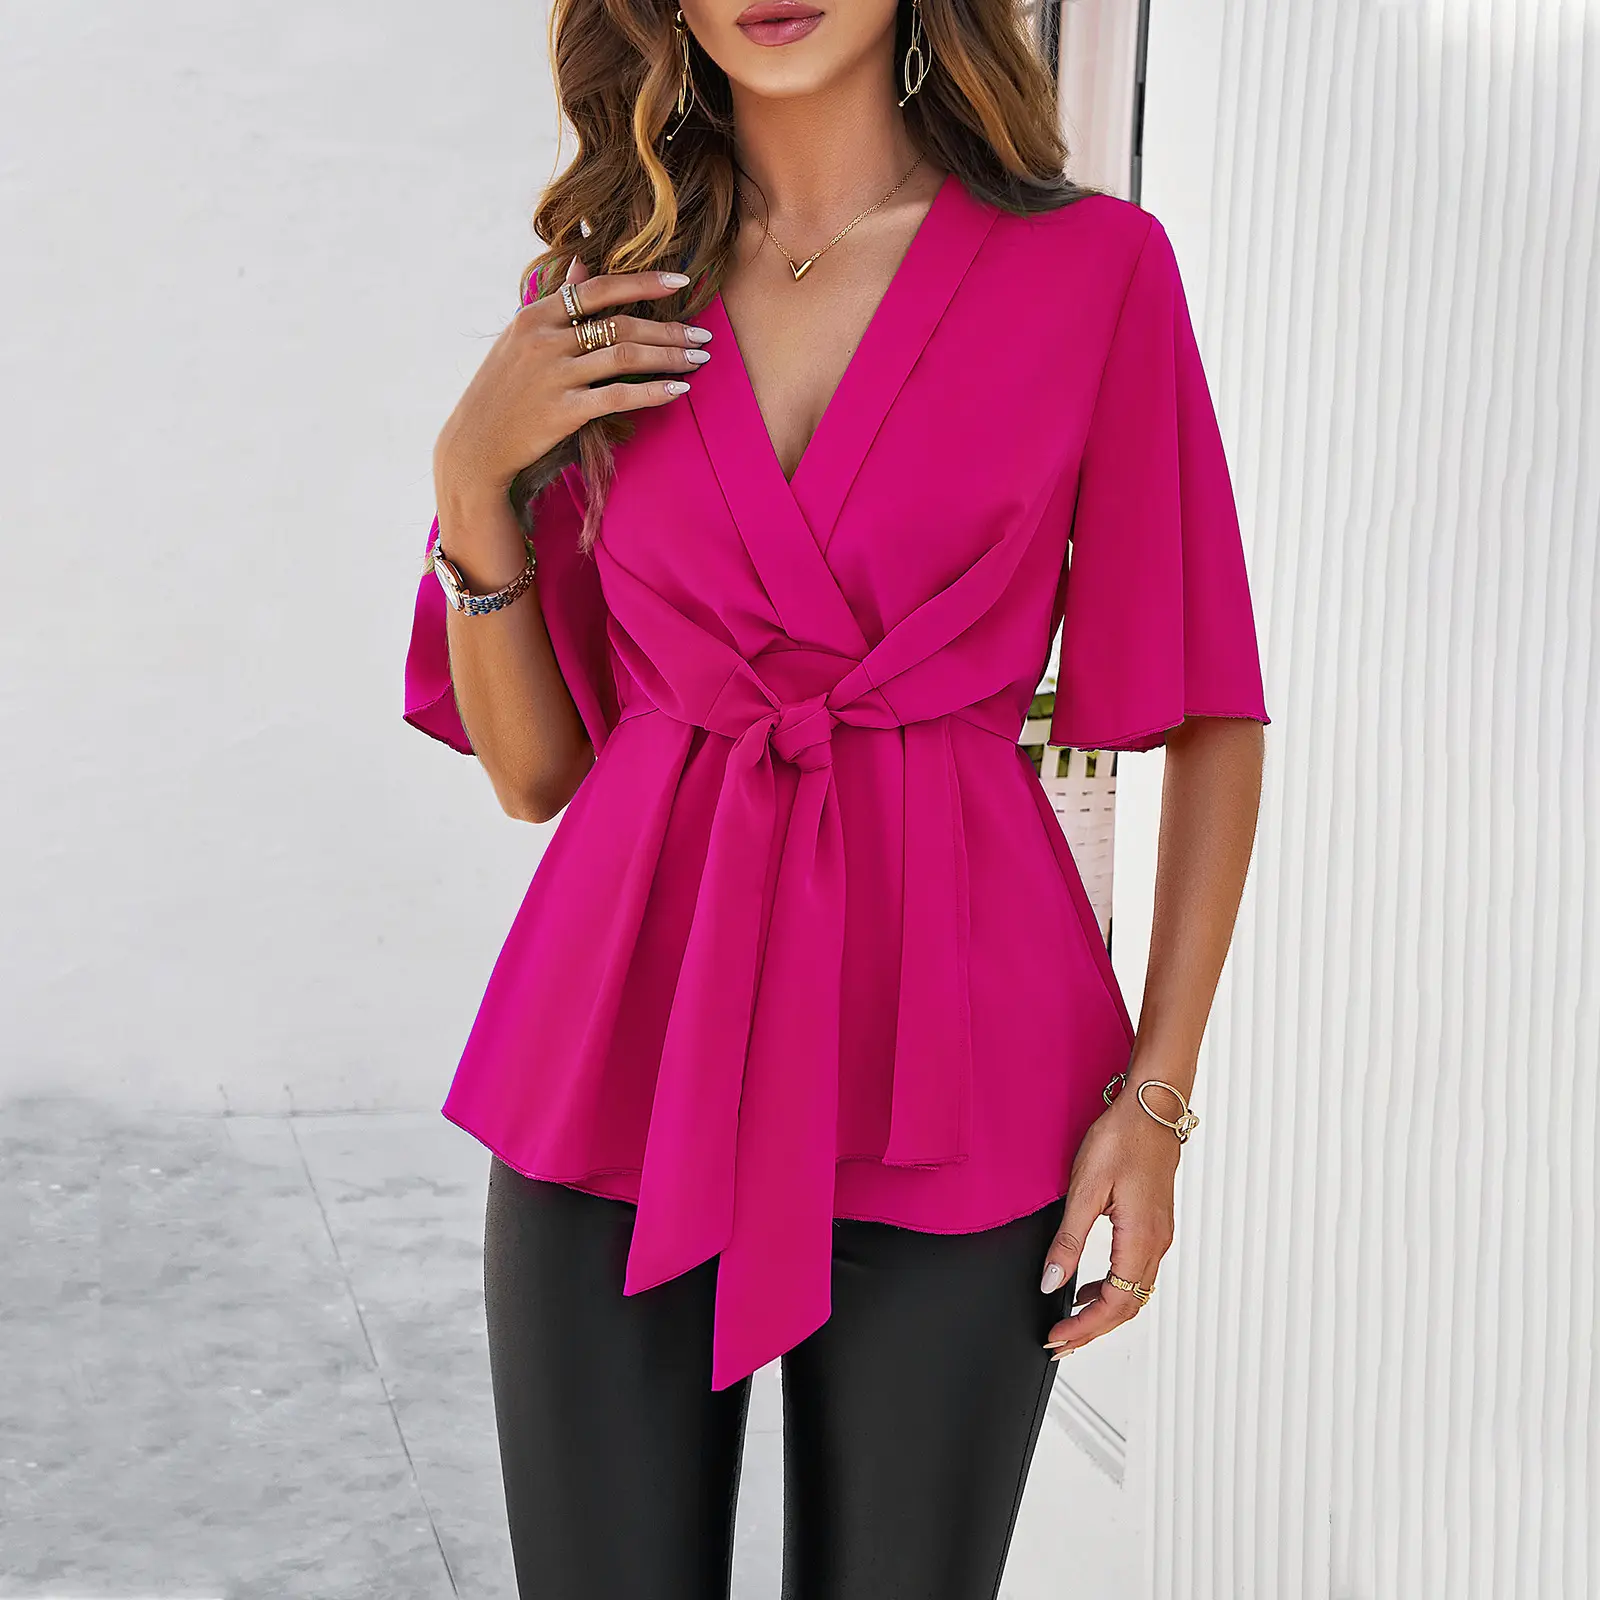 New Wholesale Customized Commuter Solid Color Casual Women's Short Sleeve Elegant Tie Corset Top